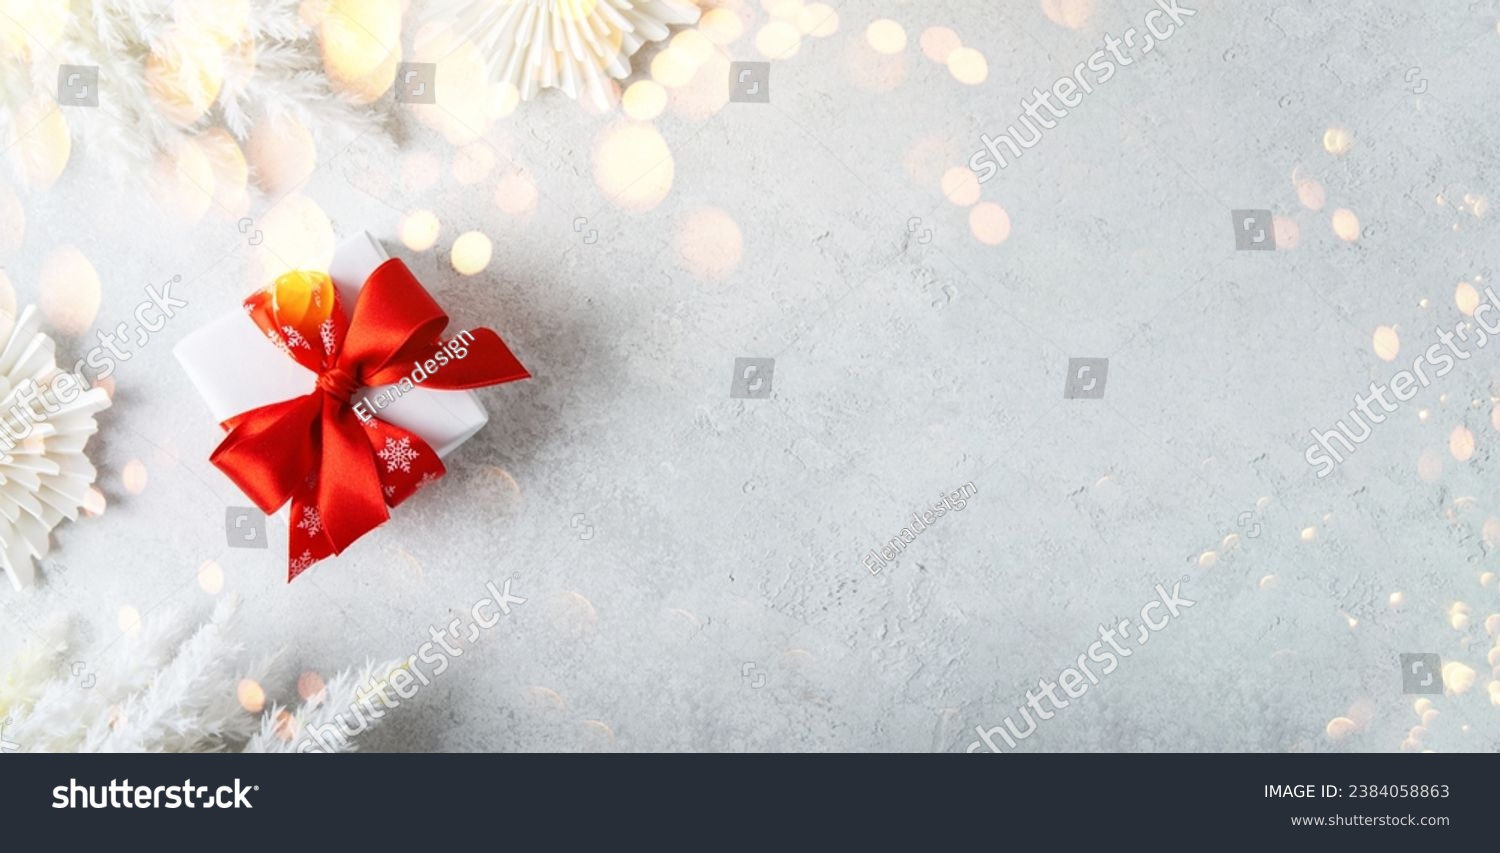 Merry Christmas and Happy Holidays greeting card, frame, banner. New Year. Noel. White Christmas red ribbon gift and ornaments on light background top view. Winter holiday xmas theme. Flat lay. #2384058863